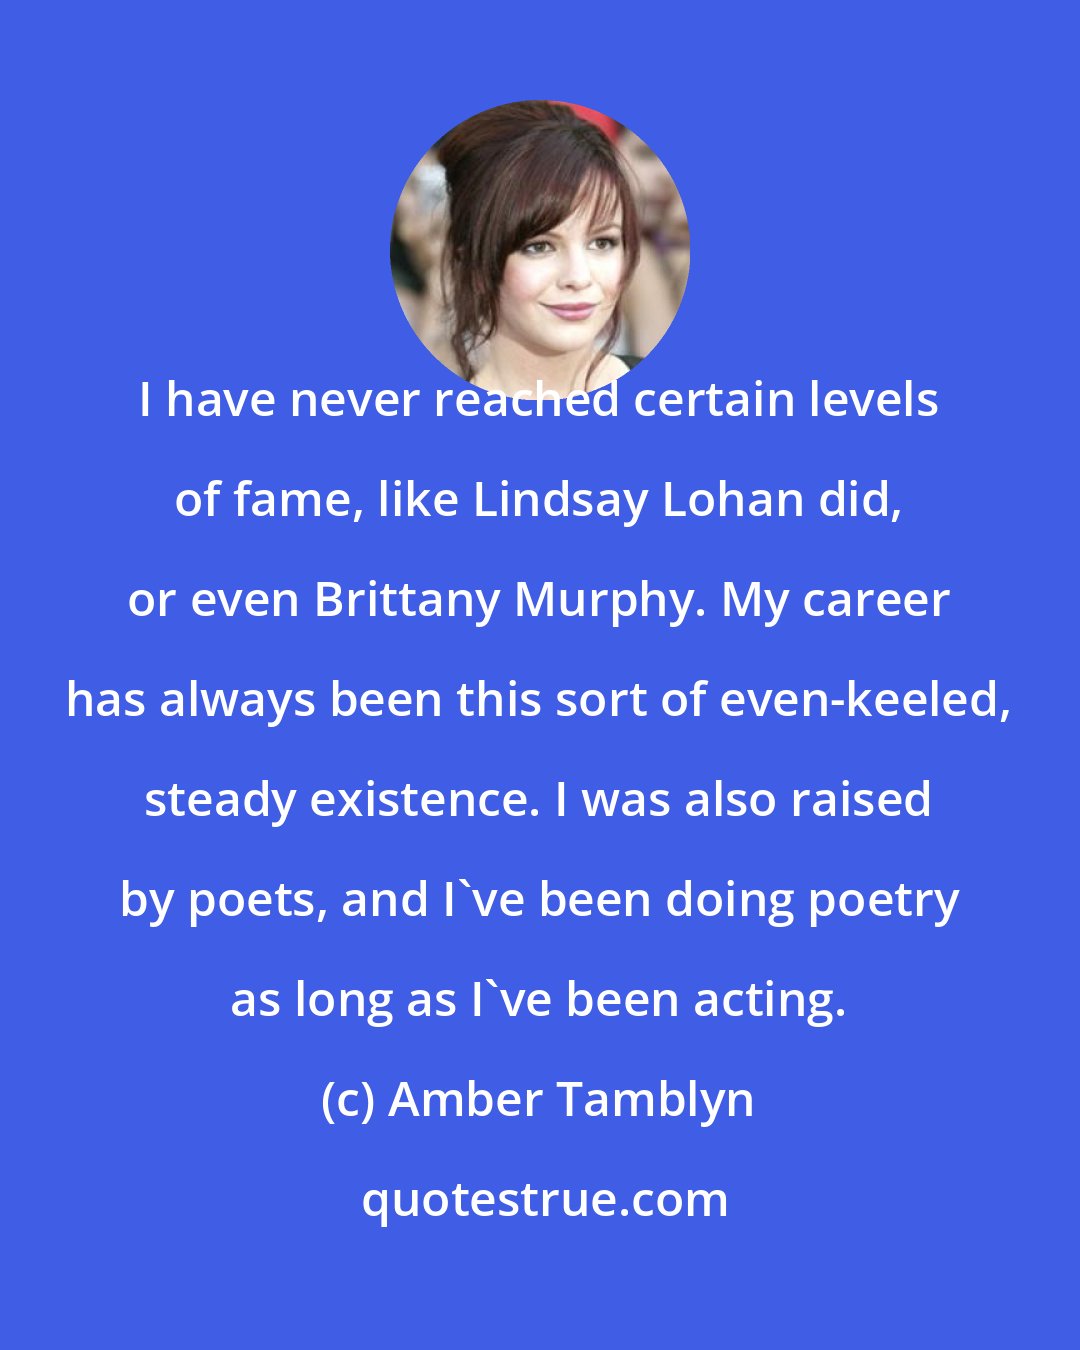 Amber Tamblyn: I have never reached certain levels of fame, like Lindsay Lohan did, or even Brittany Murphy. My career has always been this sort of even-keeled, steady existence. I was also raised by poets, and I've been doing poetry as long as I've been acting.